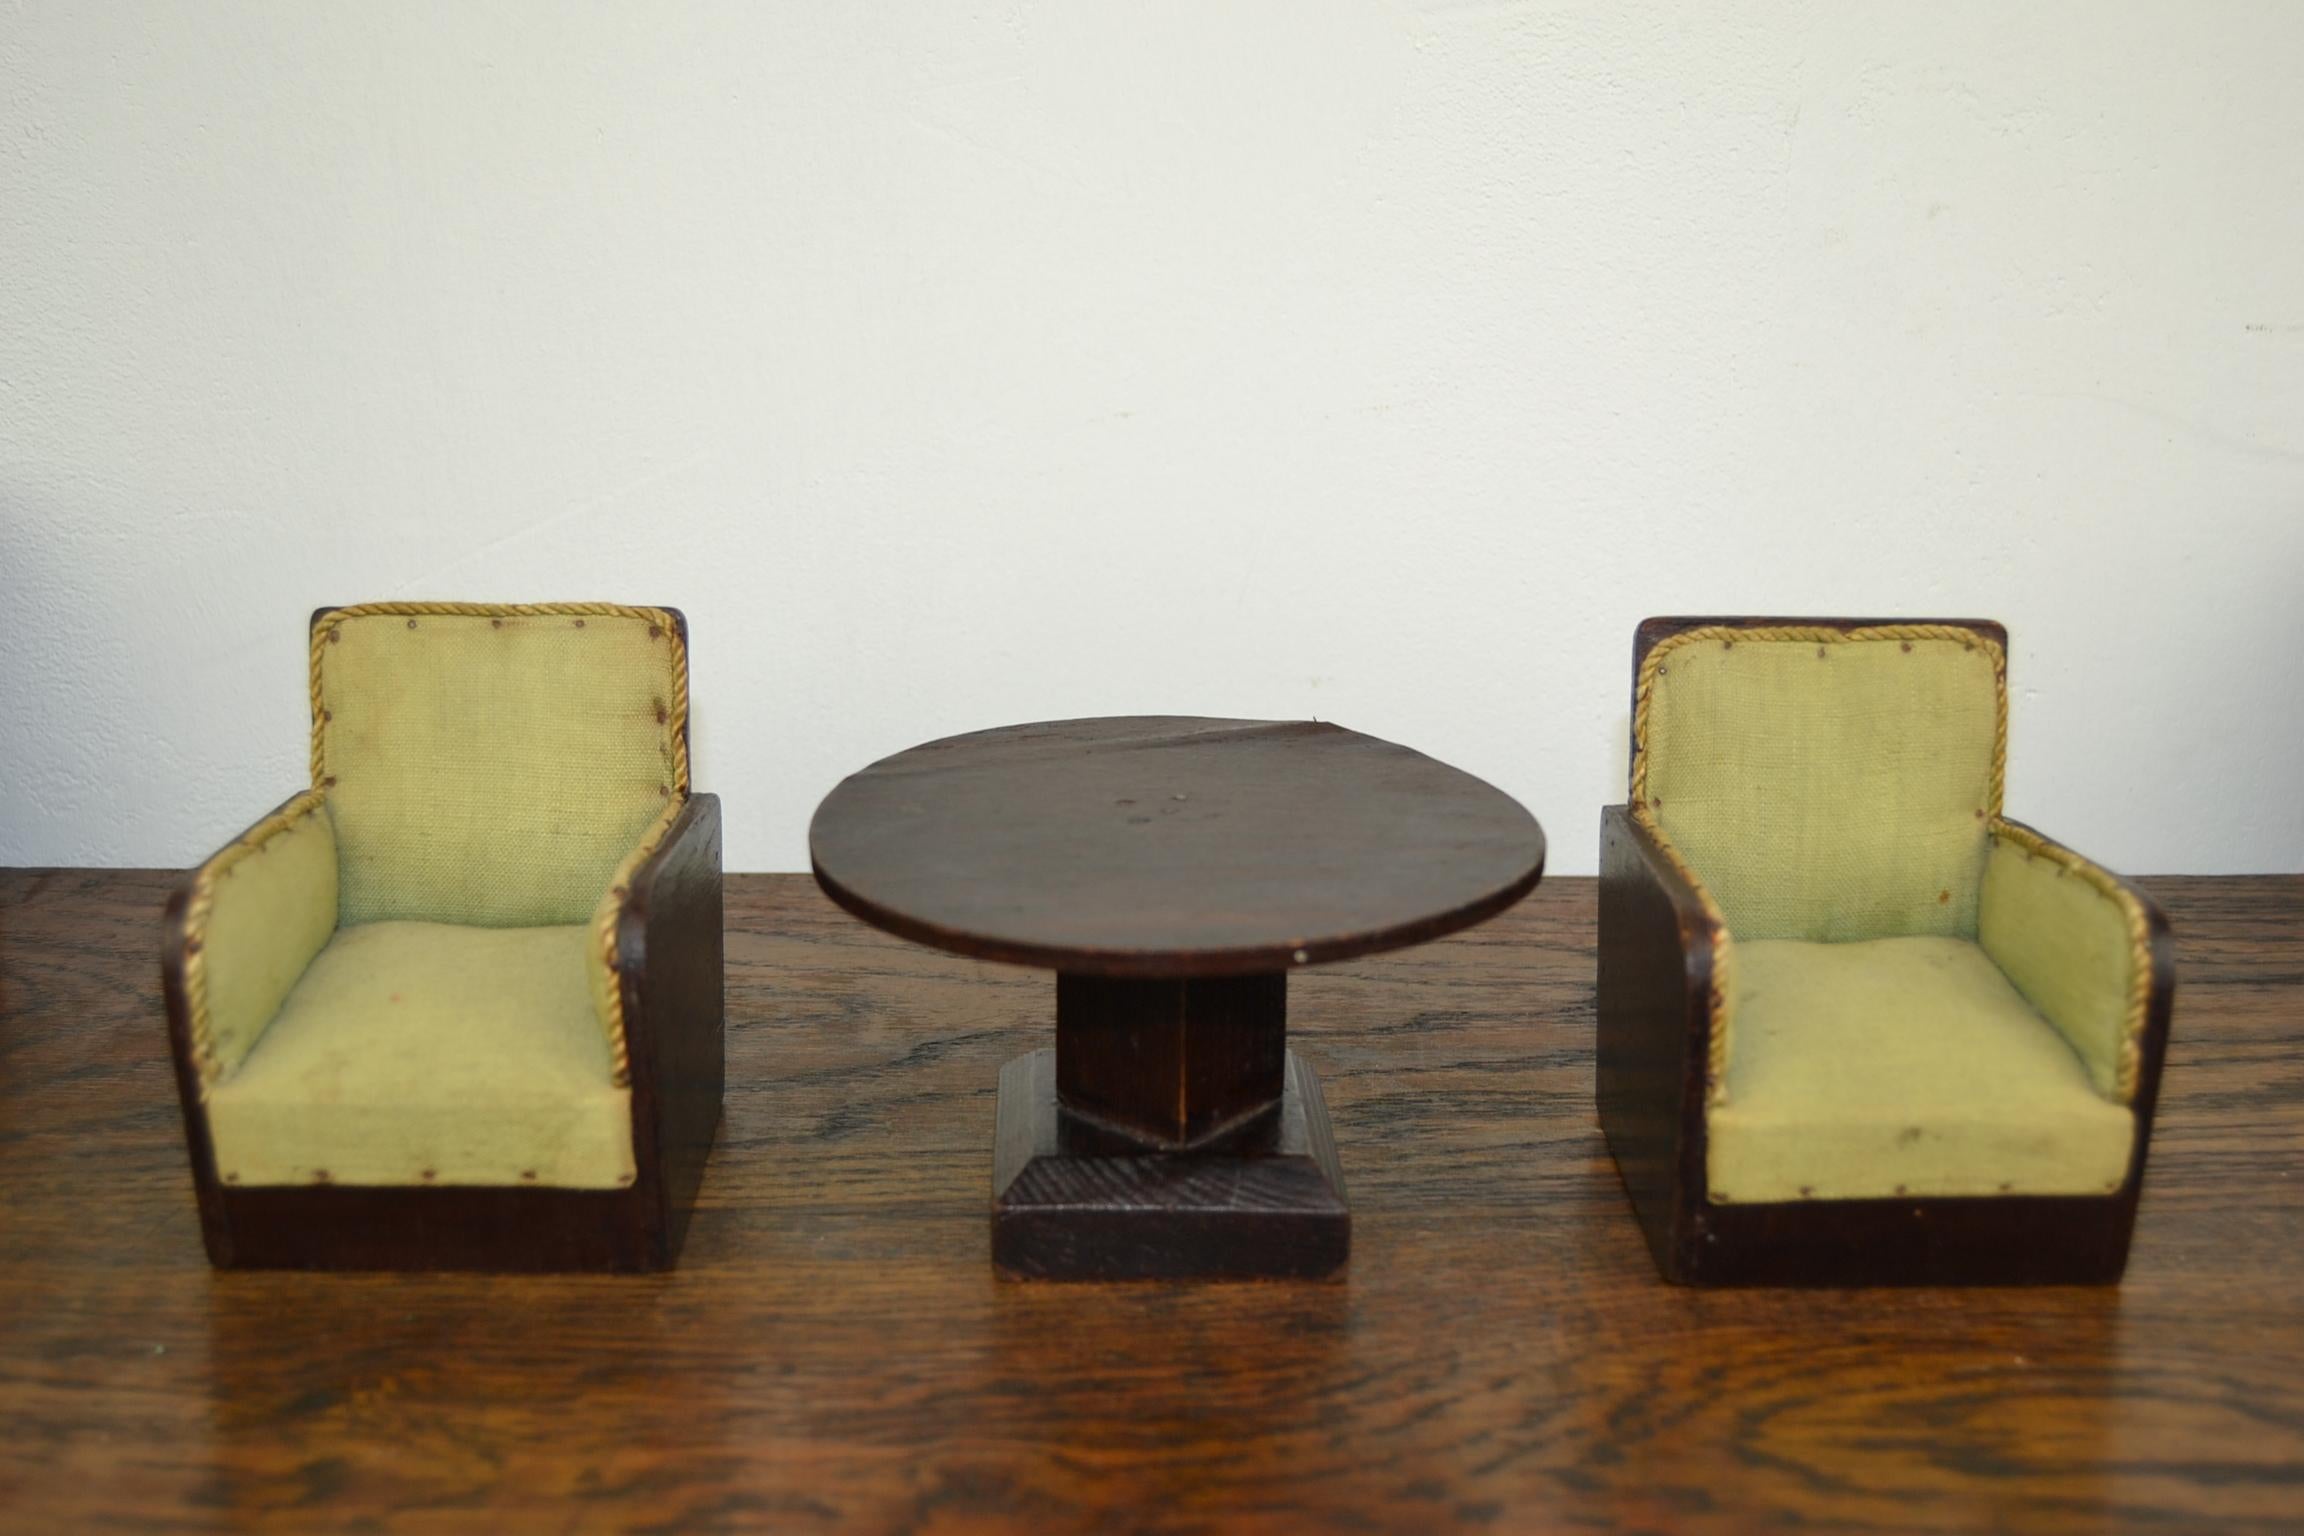 Fabric Miniature Art Deco Furniture, Club Chairs, Coffee Table, Seat and Cabinet For Sale